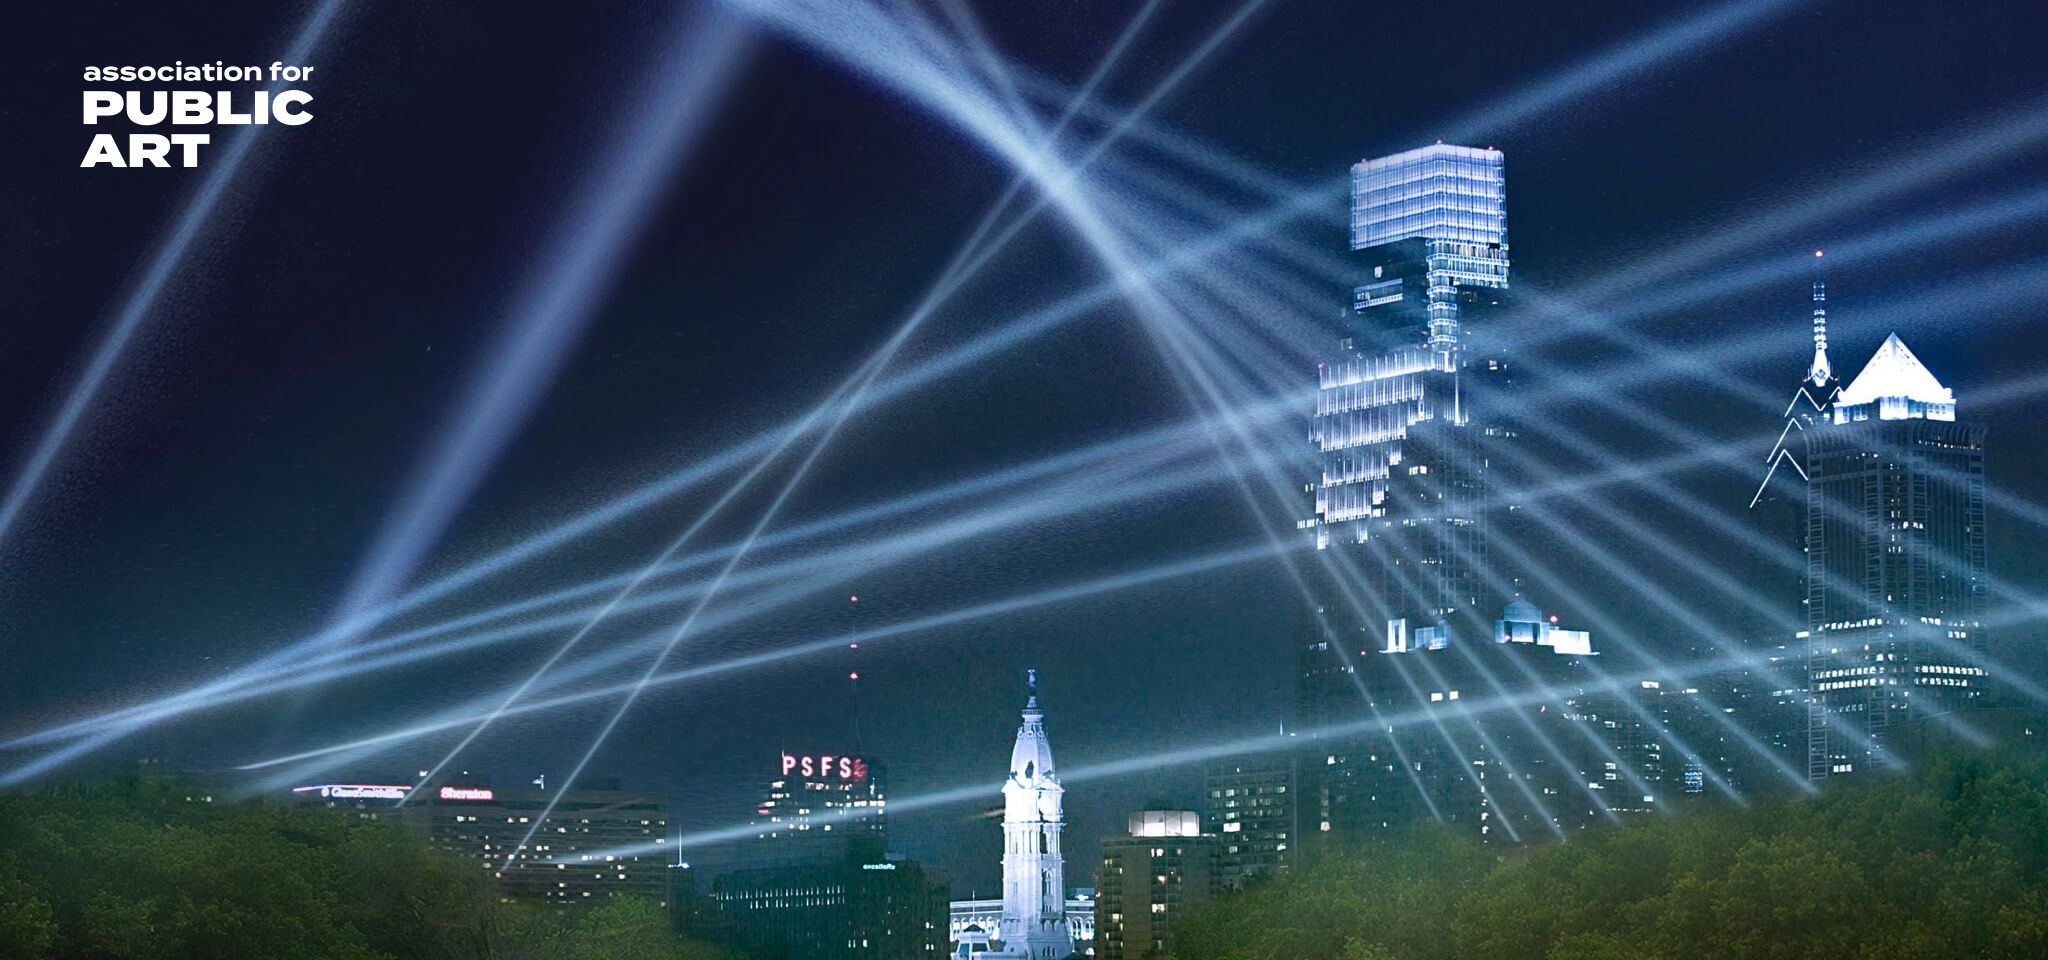 One-of-a-kind light show featuring 24 robotic searchlights creating a light sculpture in the night sky over Philadelphia’s renowned museum parkway